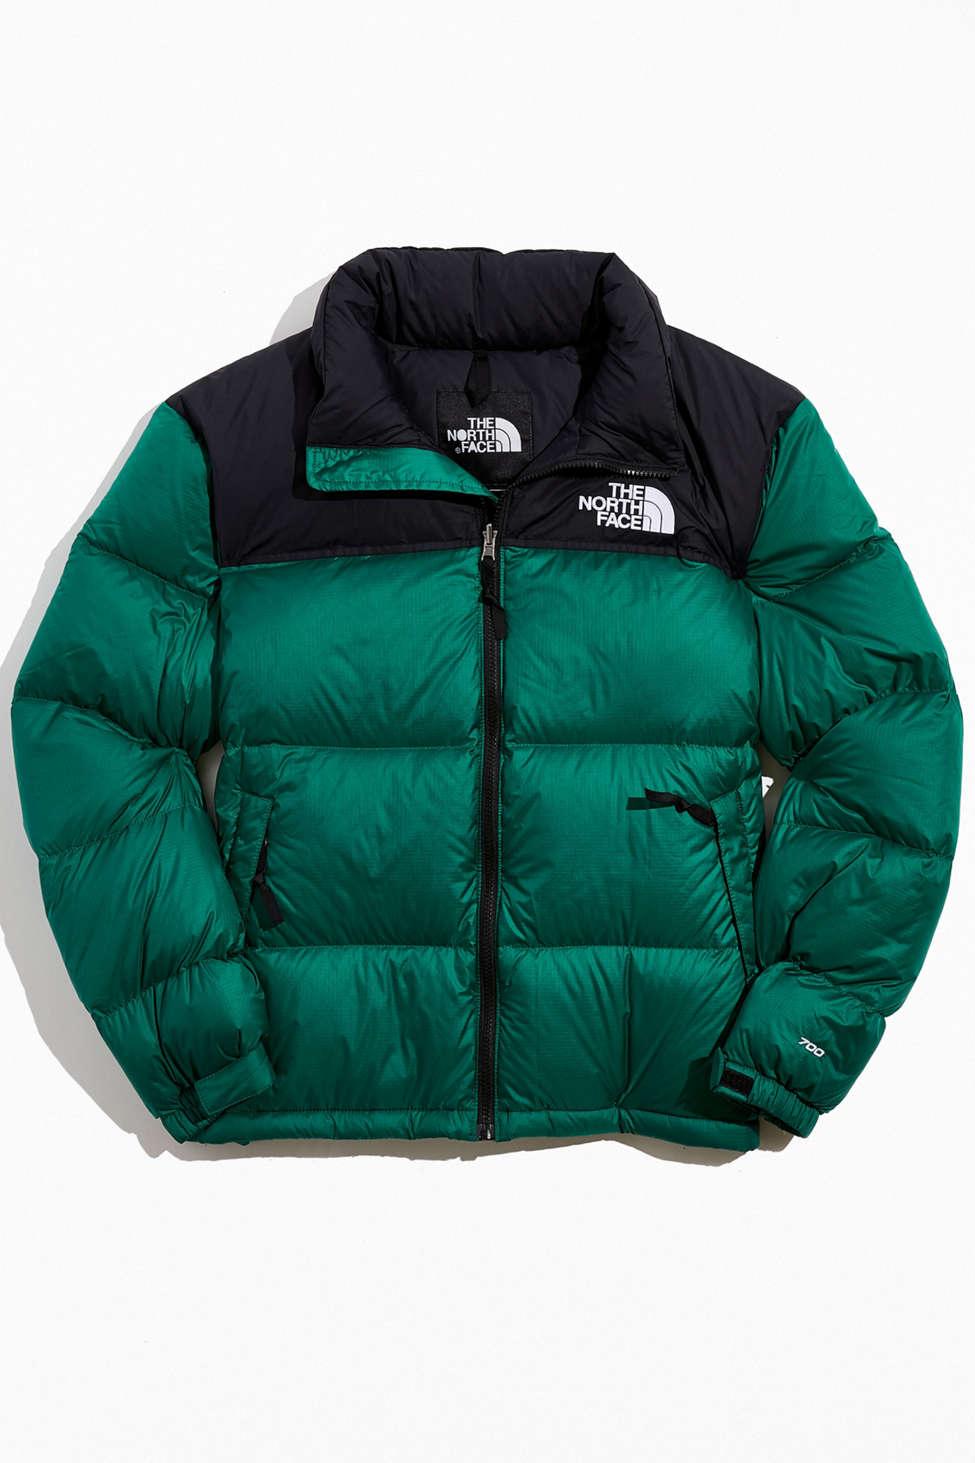 The North Face 1996 Retro Nuptse Puffer Jacket in Green for Men - Lyst